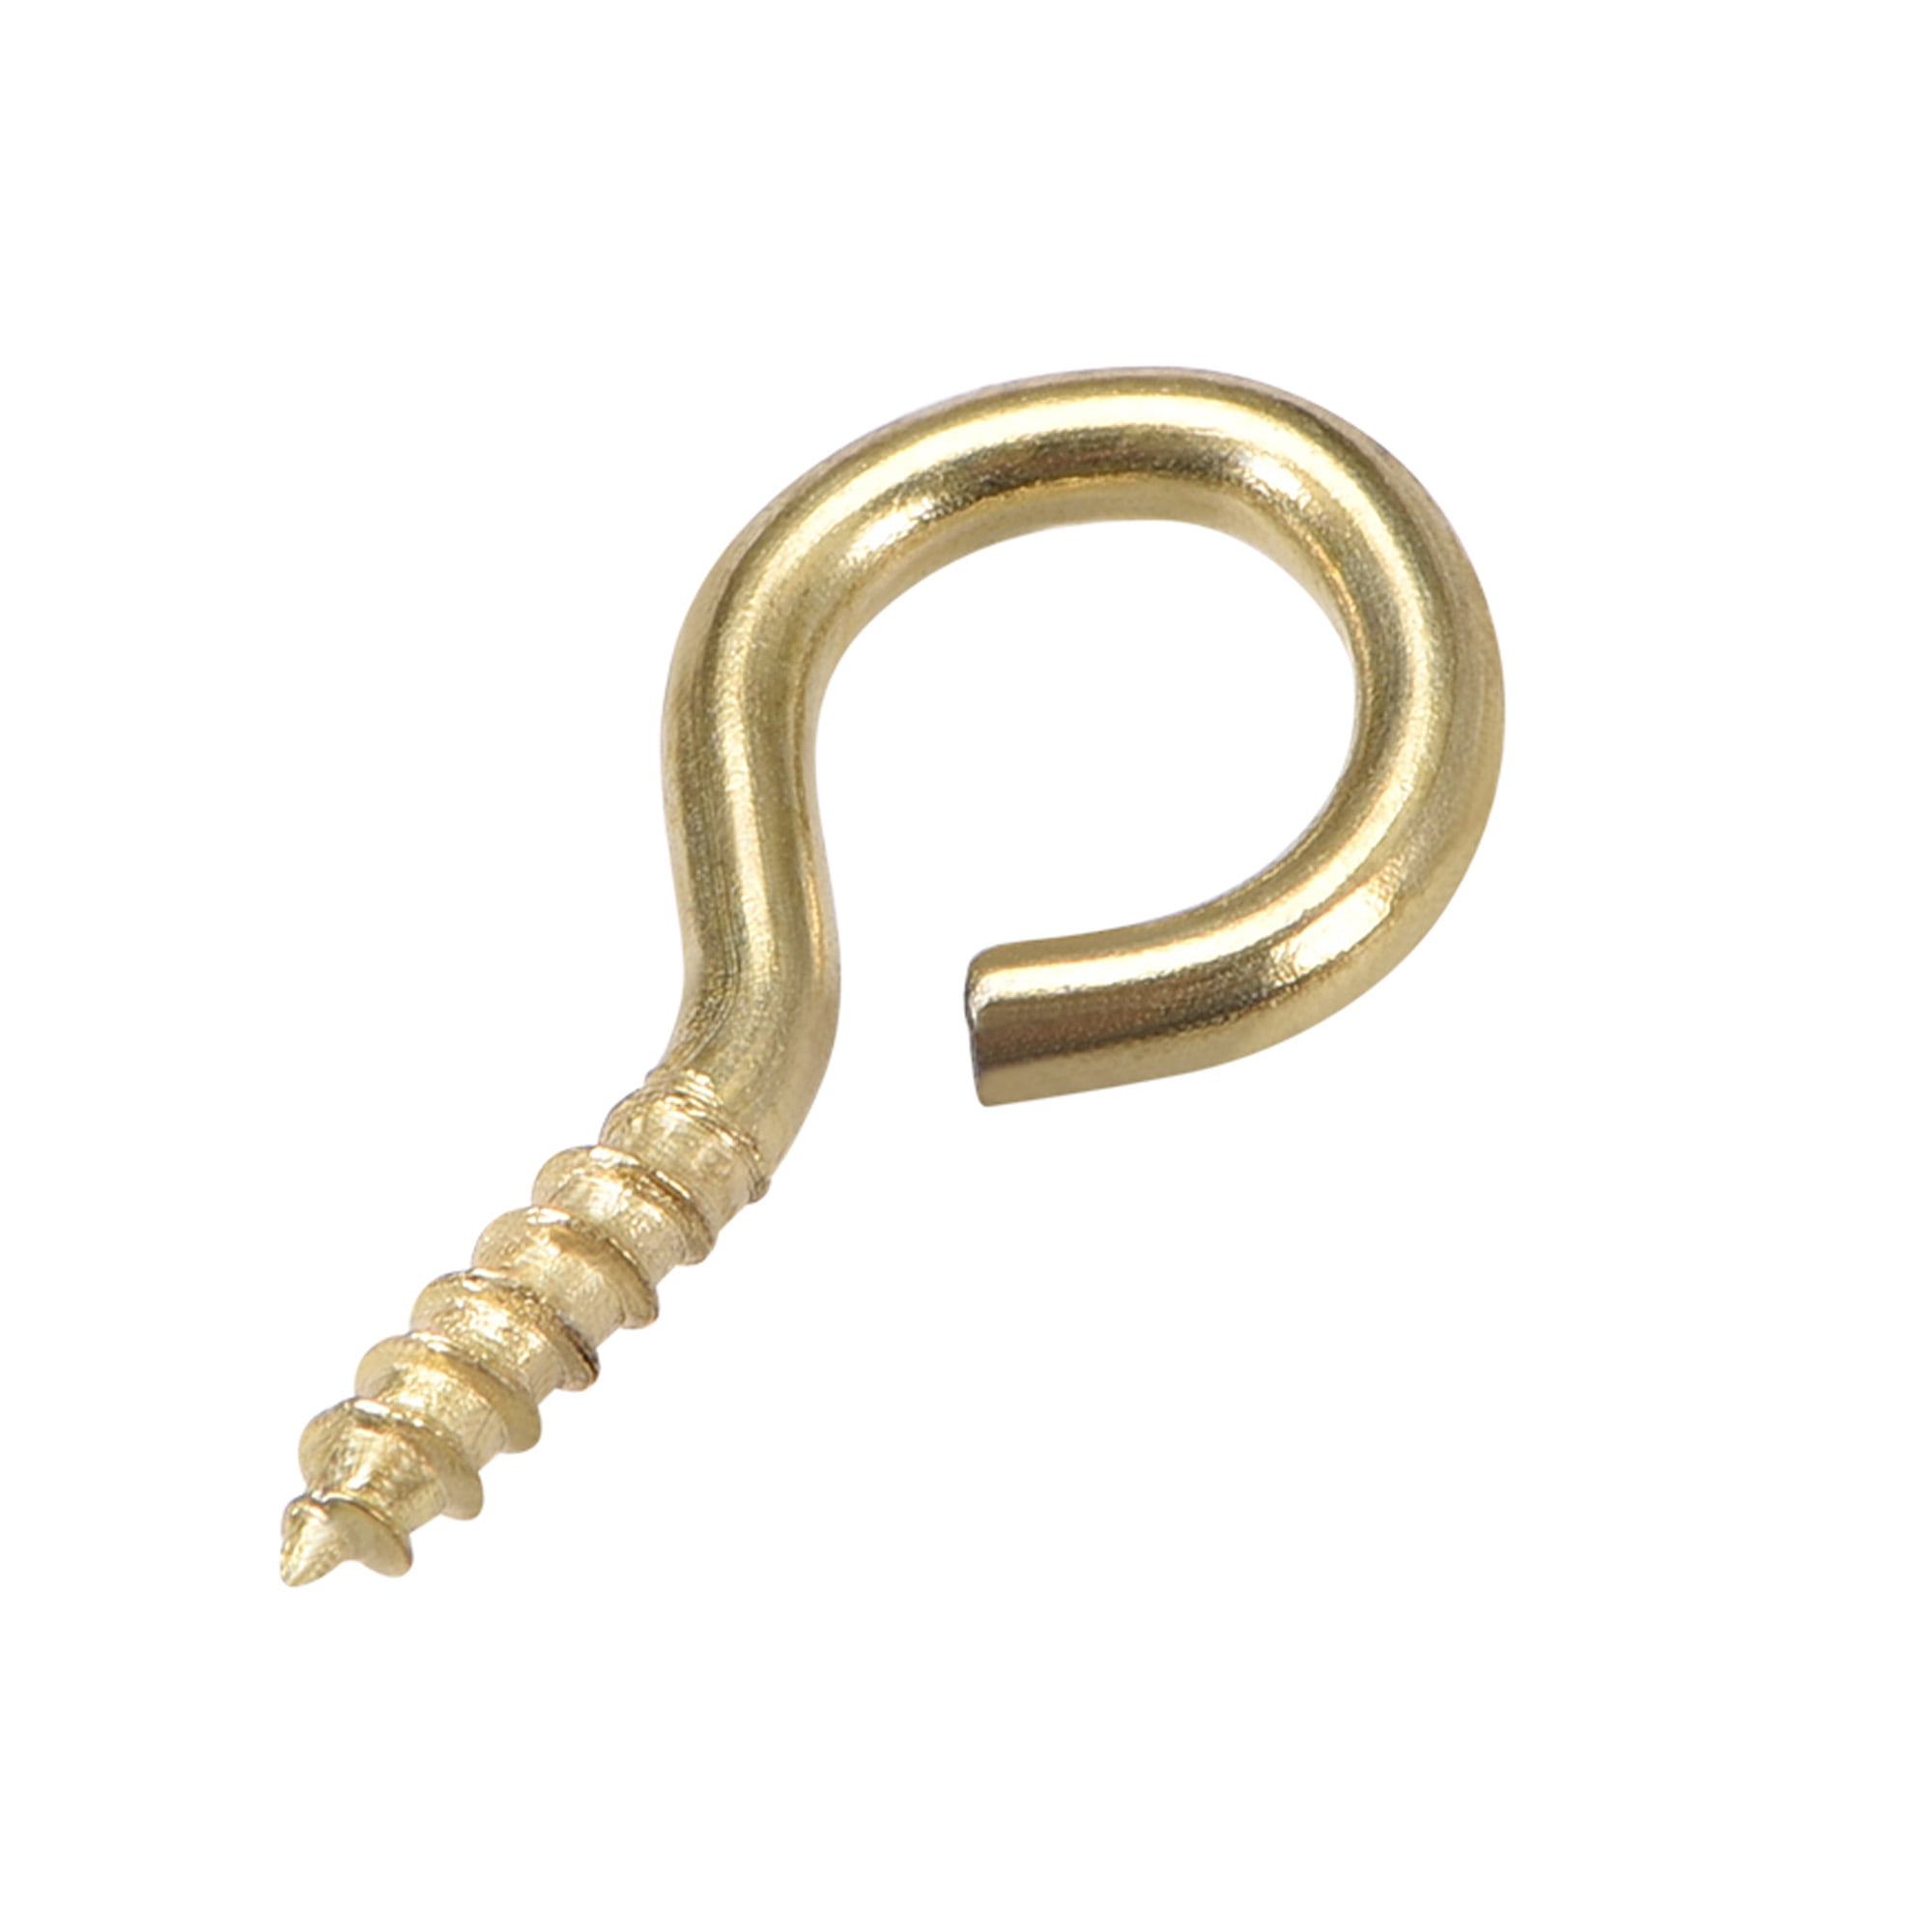 Uxcell 0.59 Small Screw Eye Hooks Self Tapping Screws Carbon